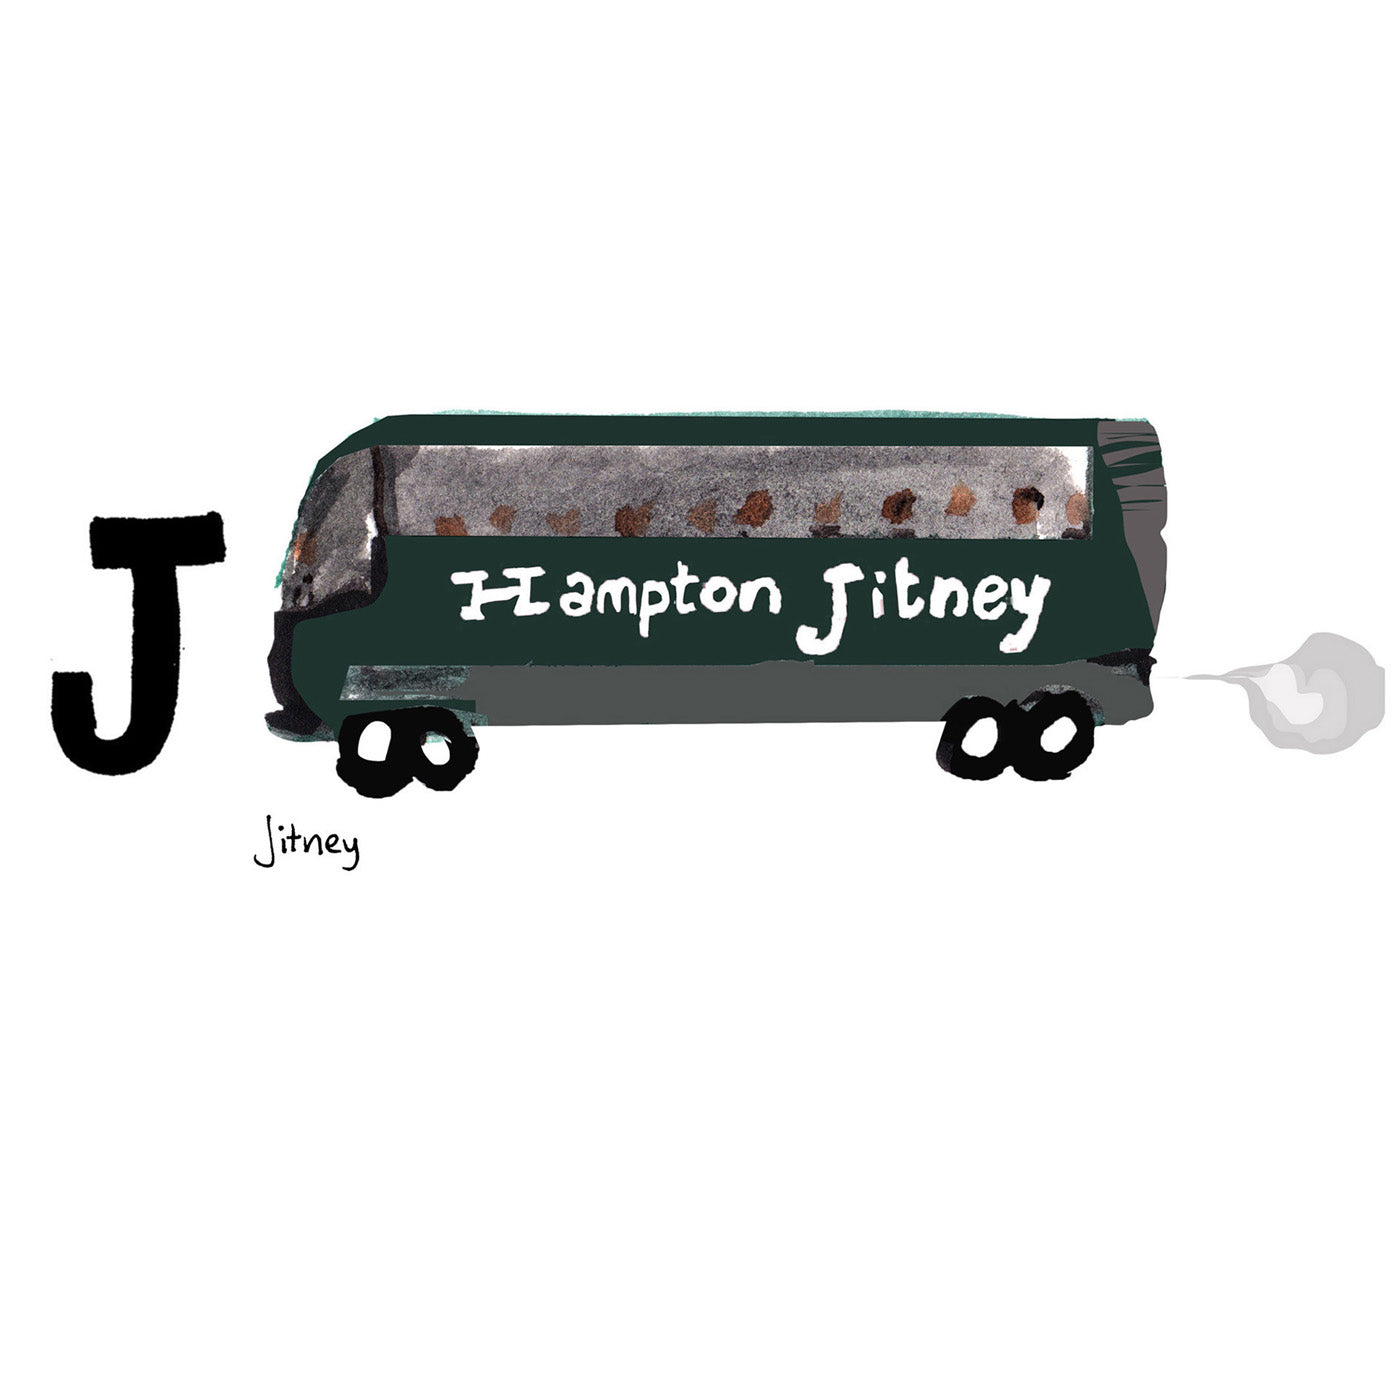 J is for Jitney. The Hampton Jitney is the legendary transportation service taking passengers from Manhattan out East to Long Island and the Hamptons. It also delivers pastries to and from the city. 